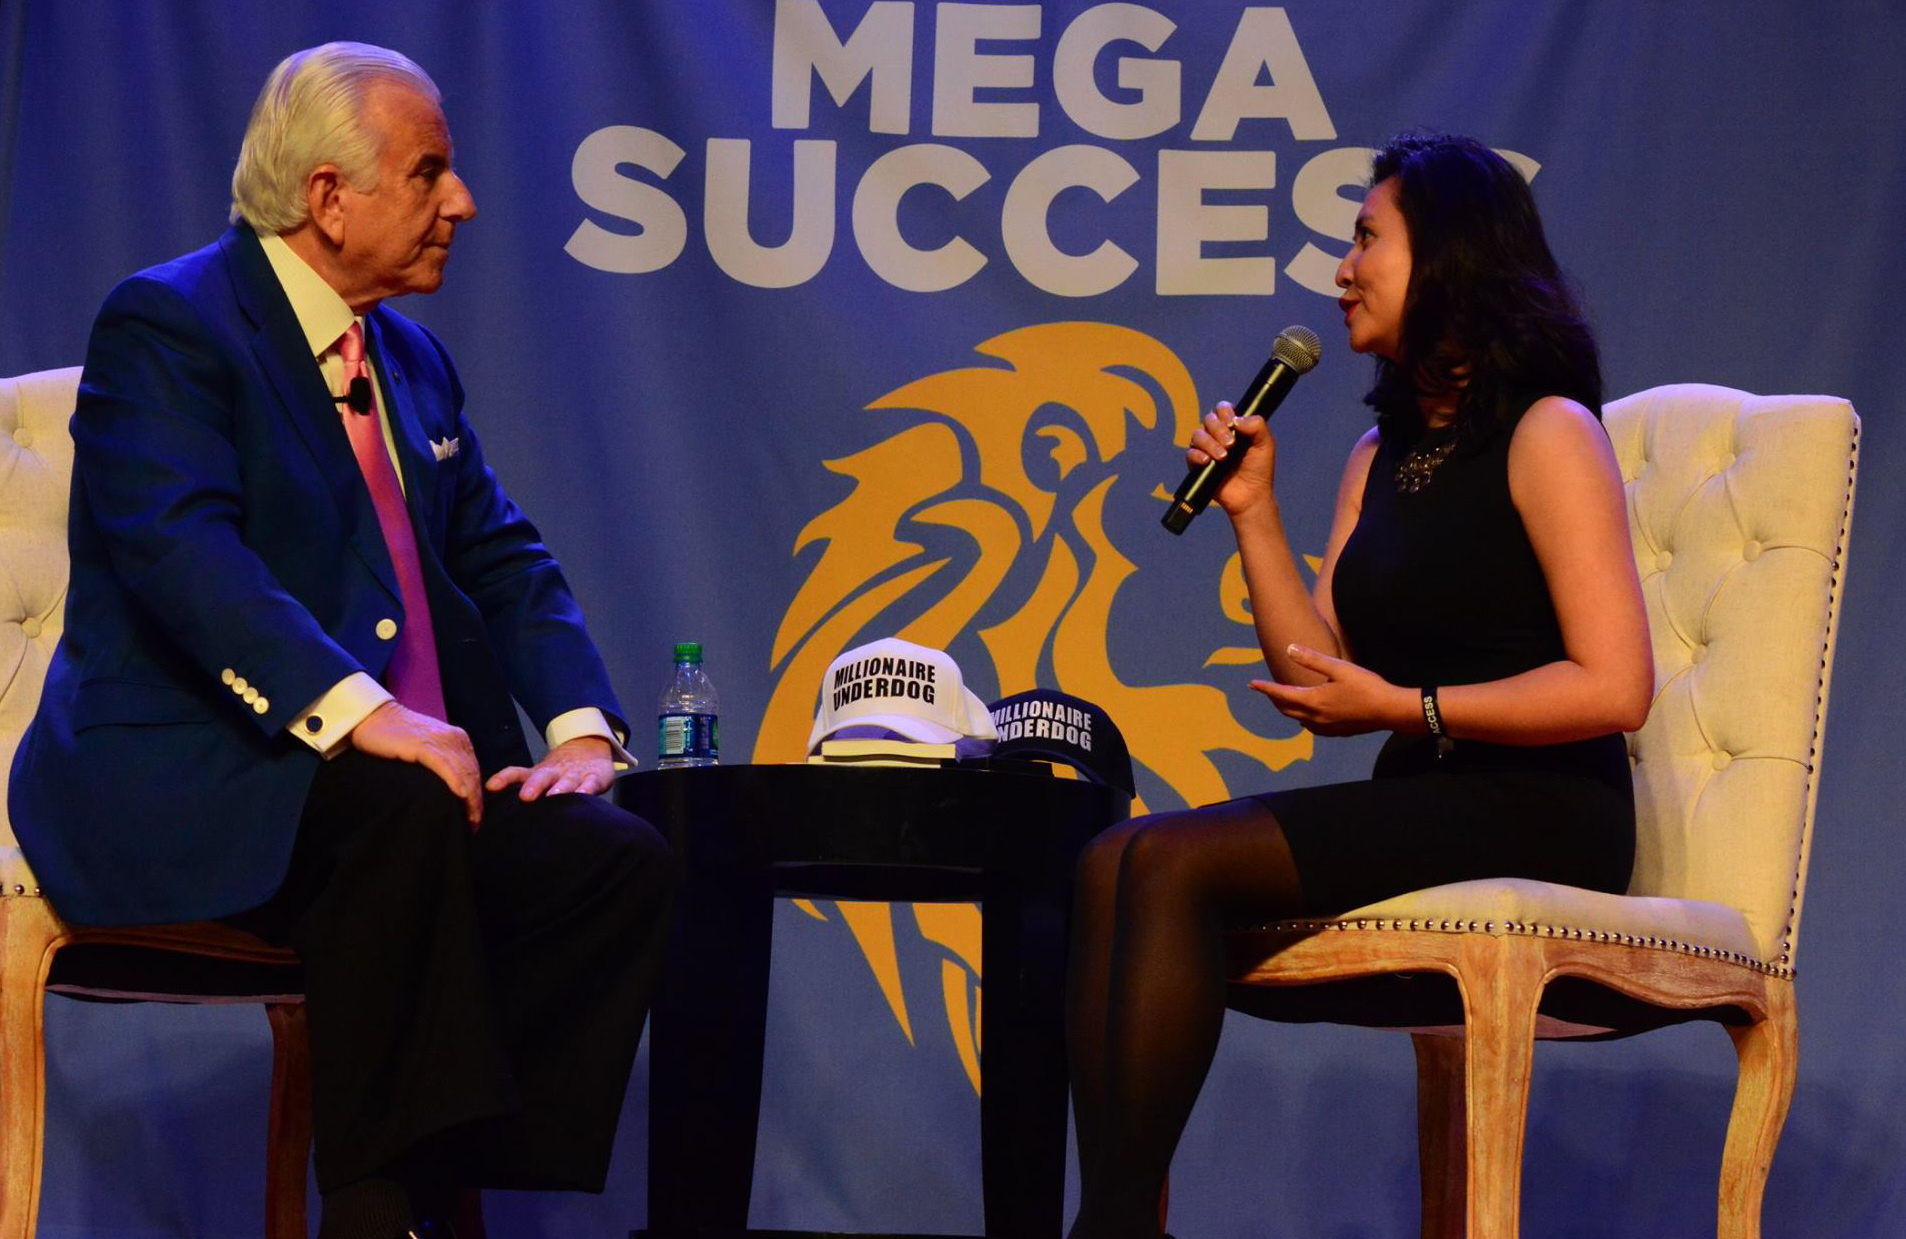 Why Branding and Marketing is So Important – with Award Winning Speaker, Entrepreneur and Marketing Expert, Dr. Nido Qubein